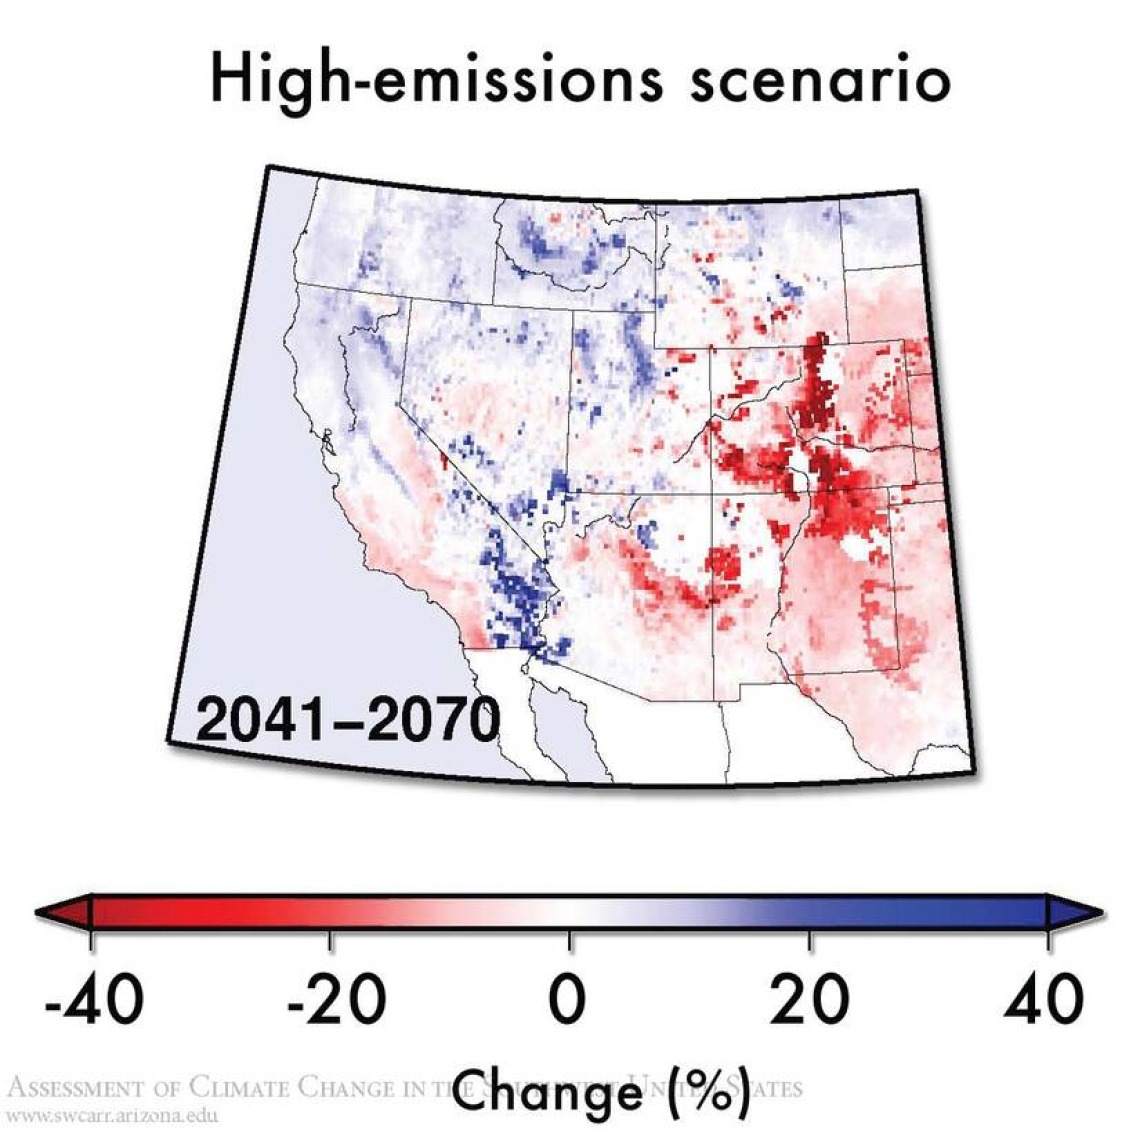 Figure 11 from Chapter 6 of Climate Assessment Report.